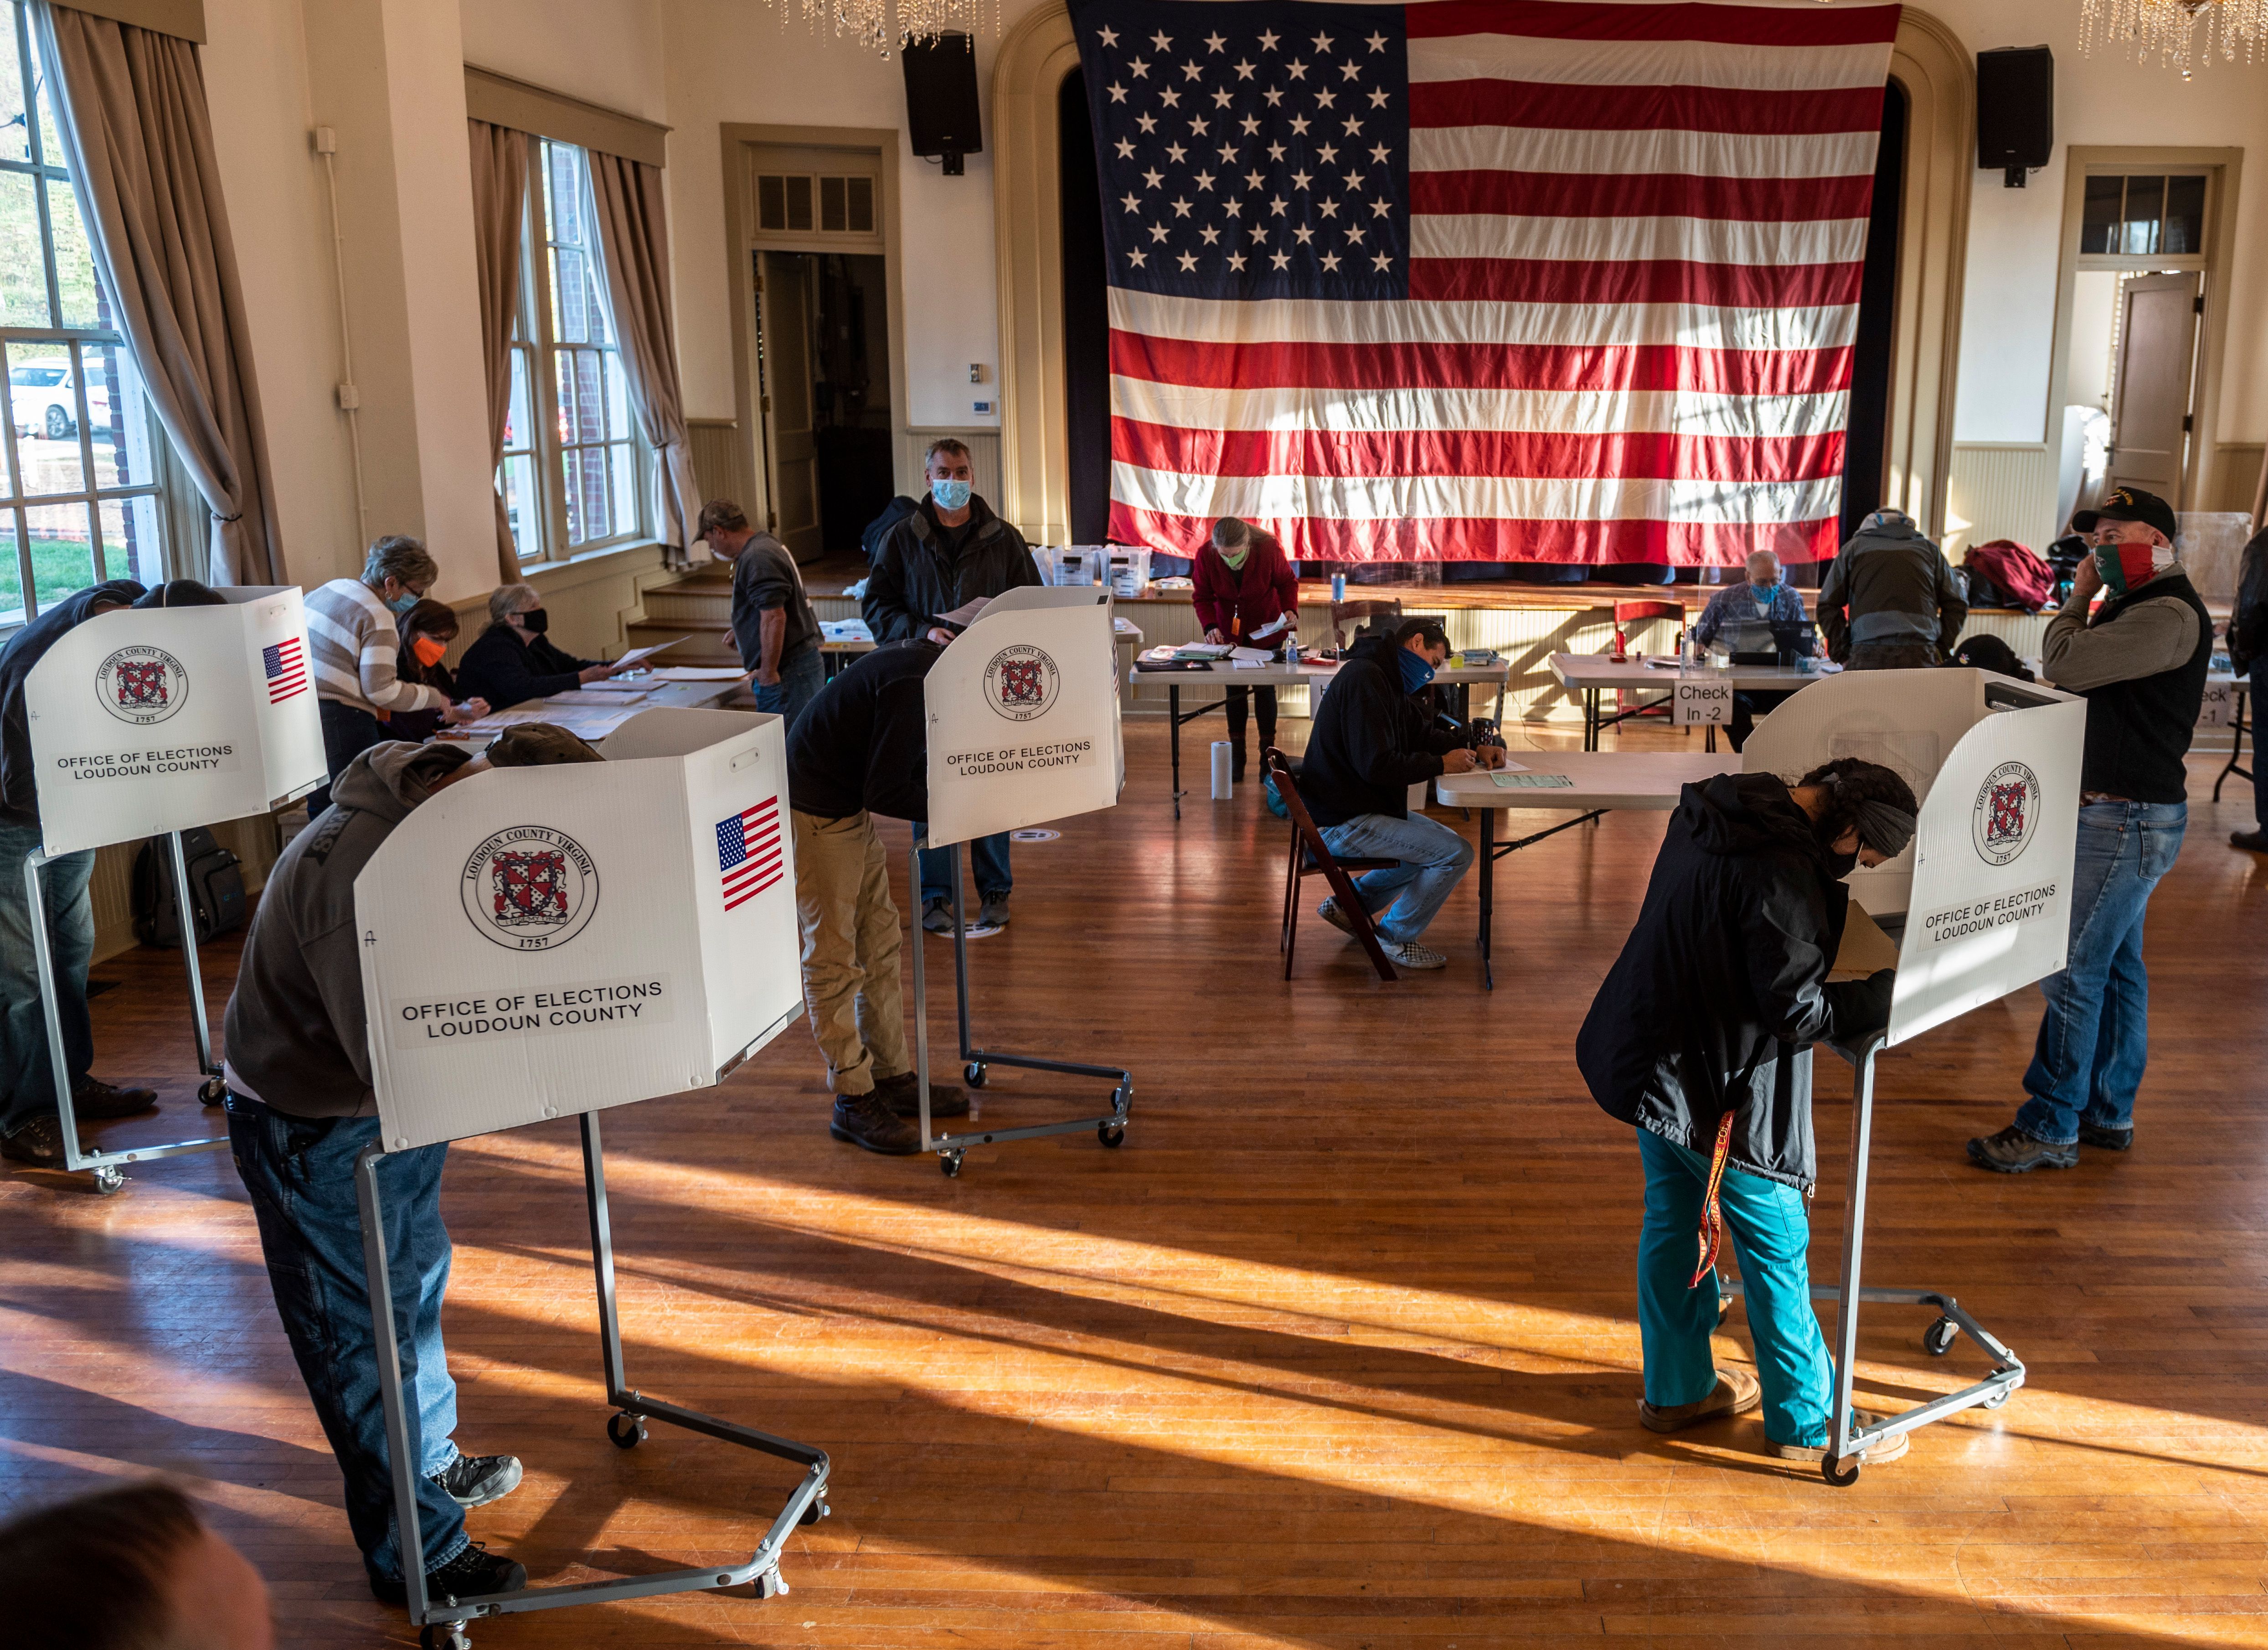  Voters cast their ballots at the old Stone School, used as a polling station, on election day in Hillsboro, Virginia on November 3,